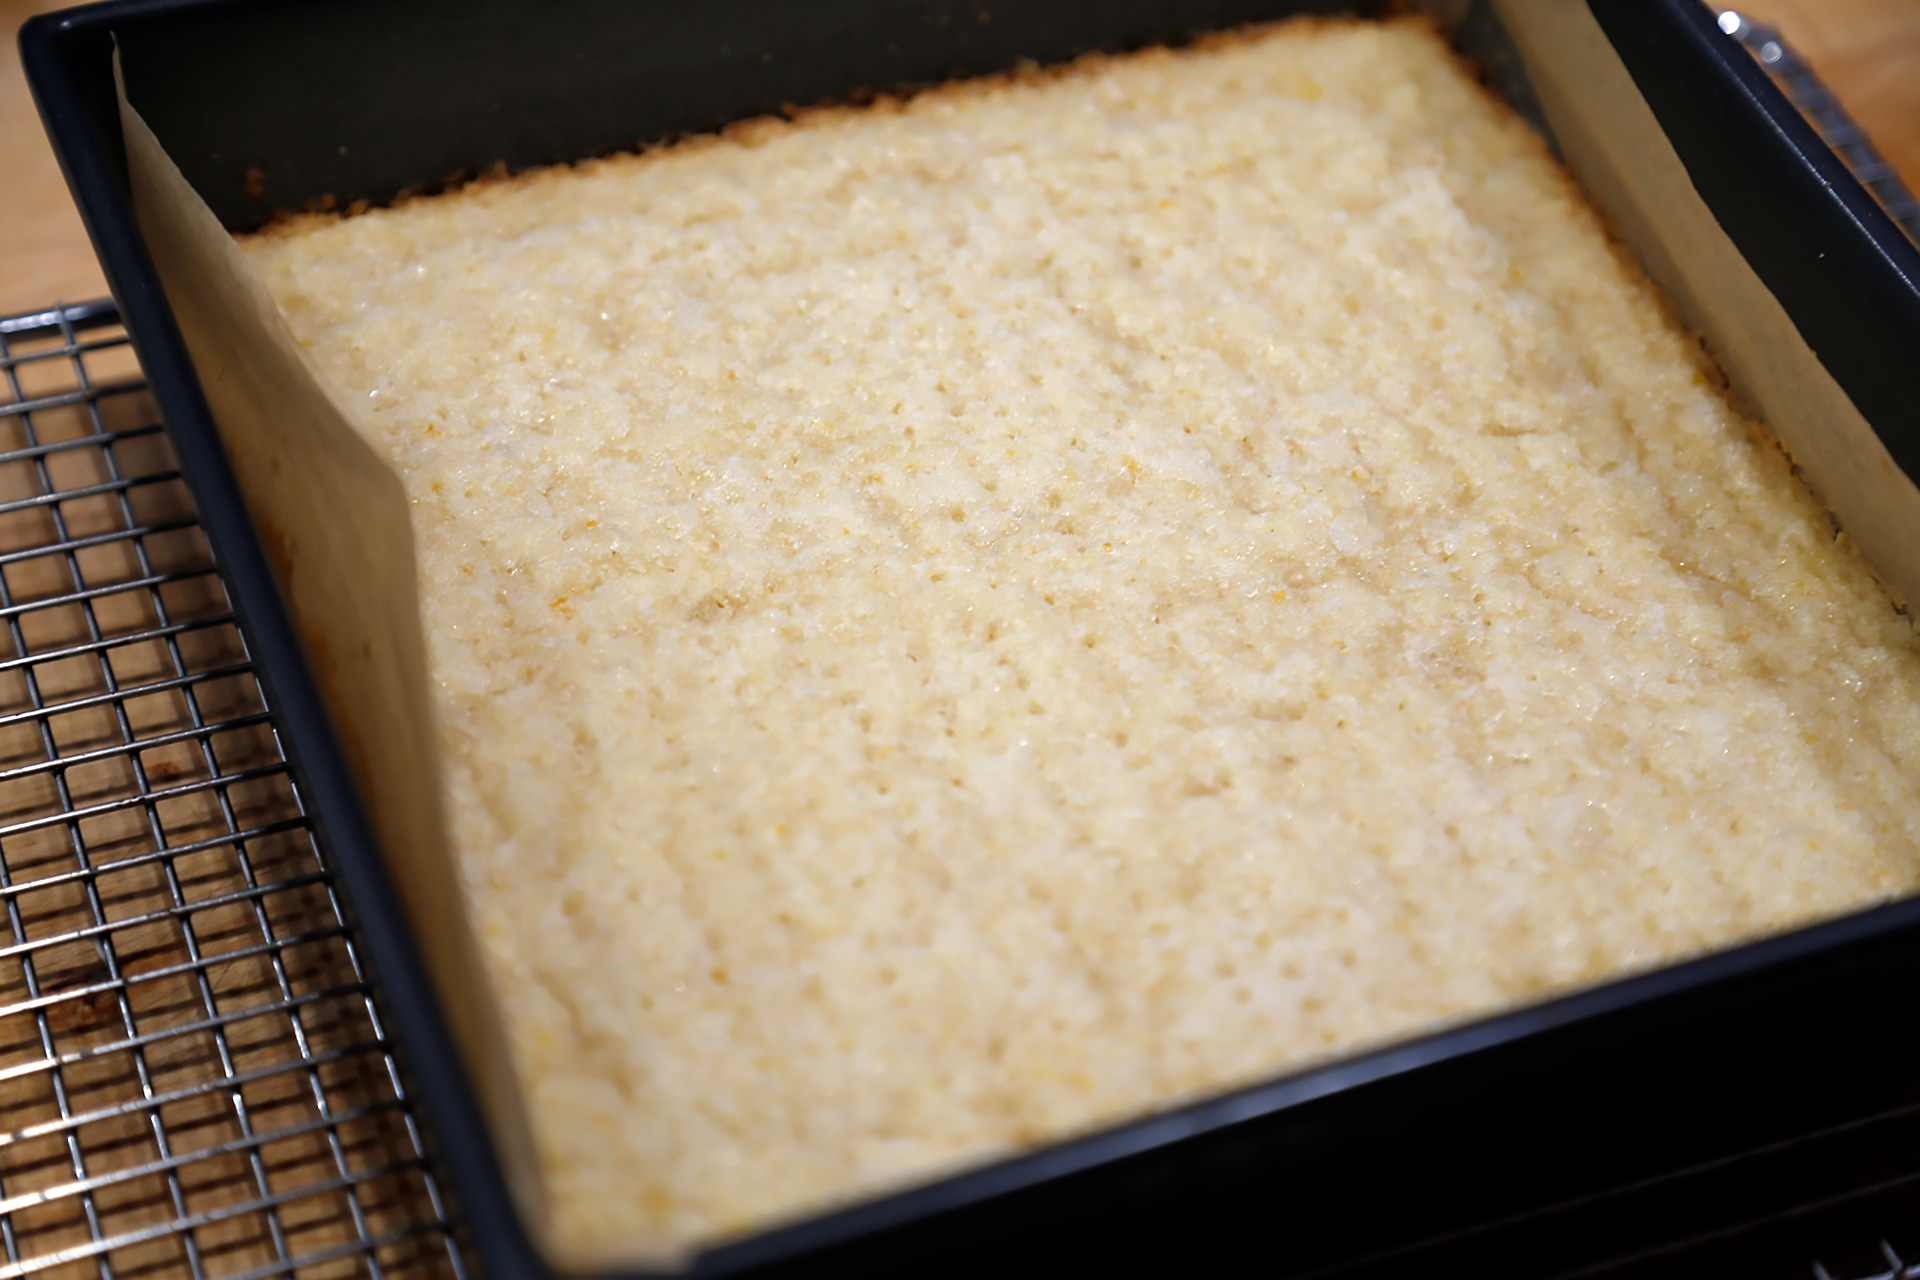 Bake until the shortbread begins to turn golden brown, about 30 minutes.